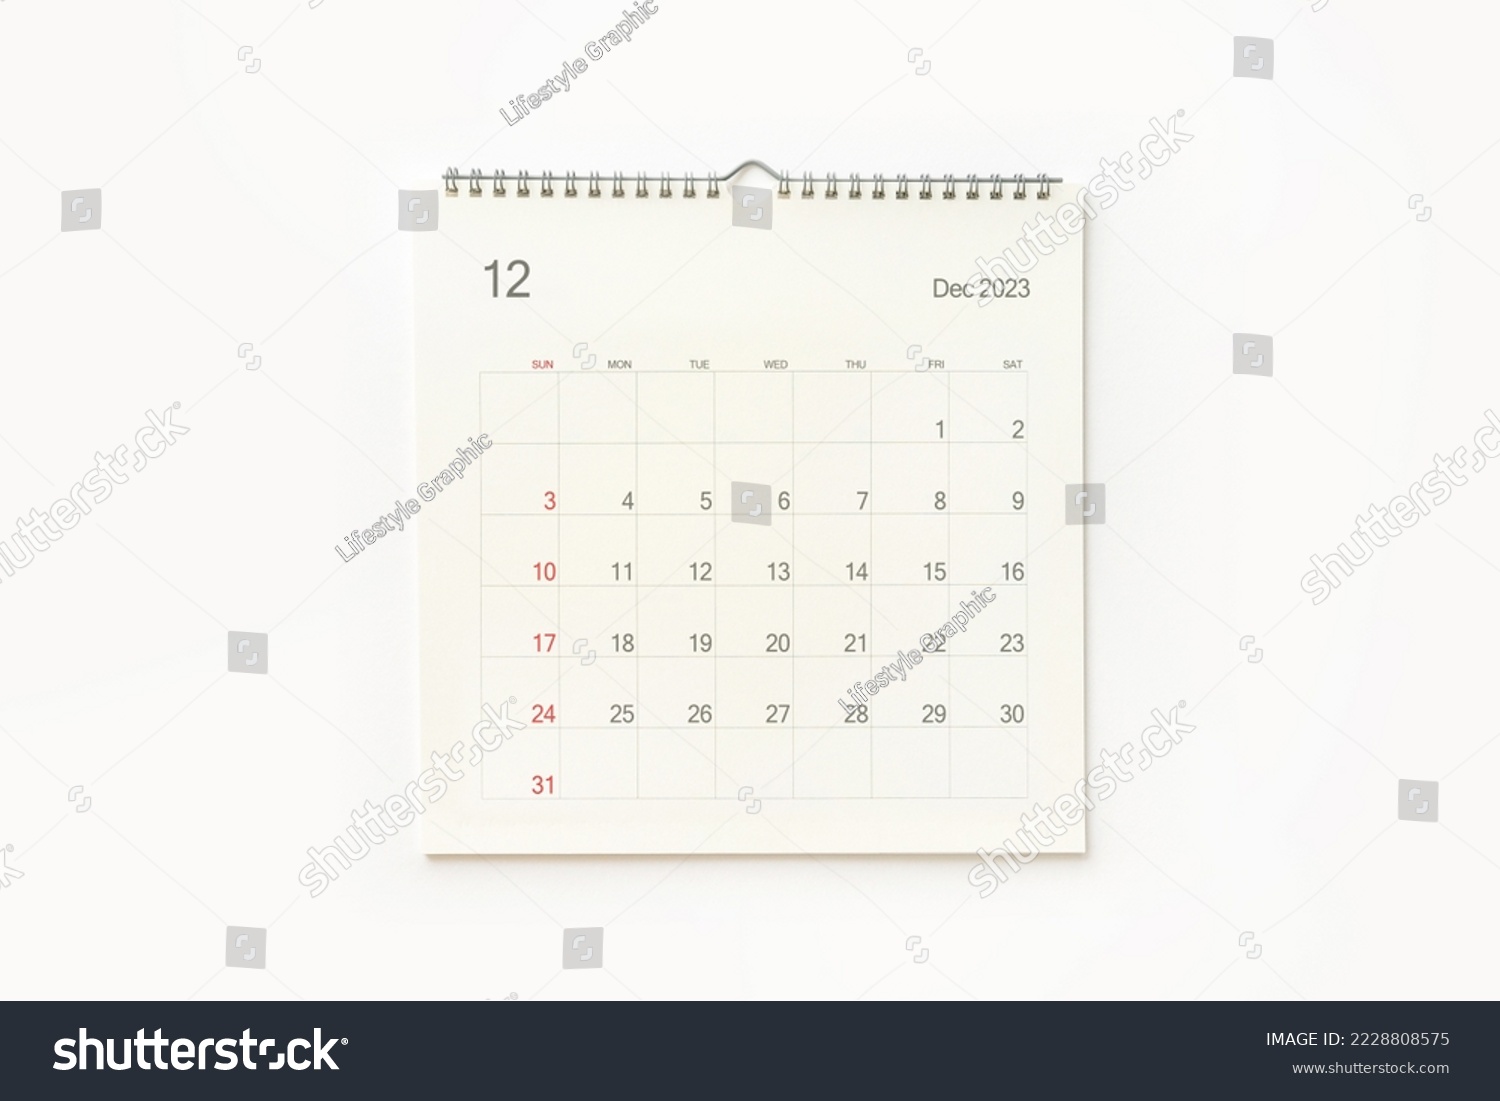 December 2023 calendar page on white background. Calendar background for reminder, business planning, appointment meeting and event. #2228808575